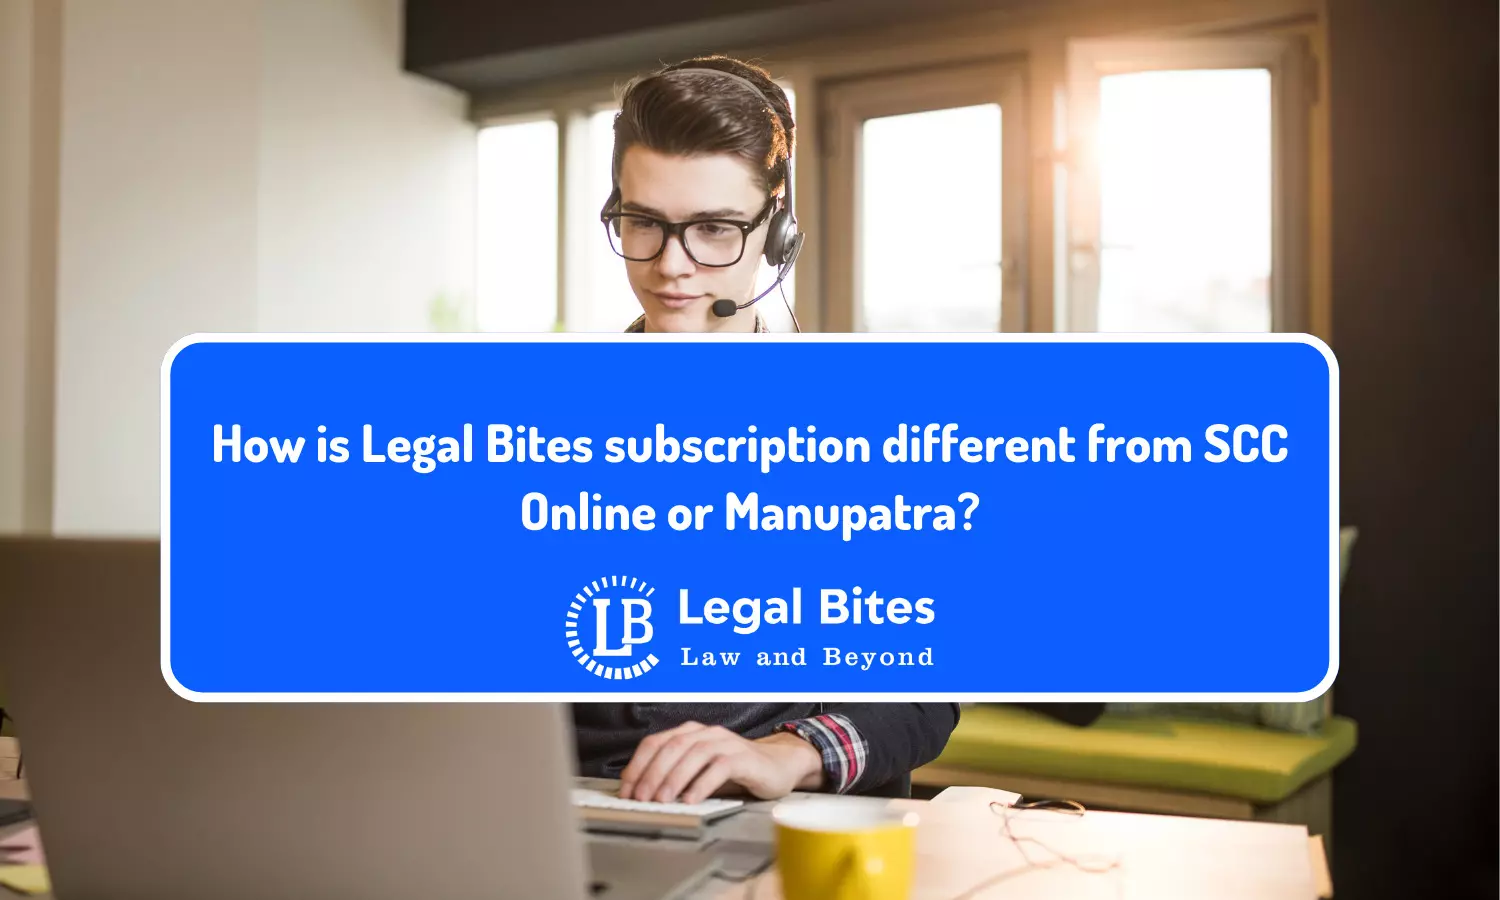 How is Legal Bites subscription different from SCC Online or Manupatra?